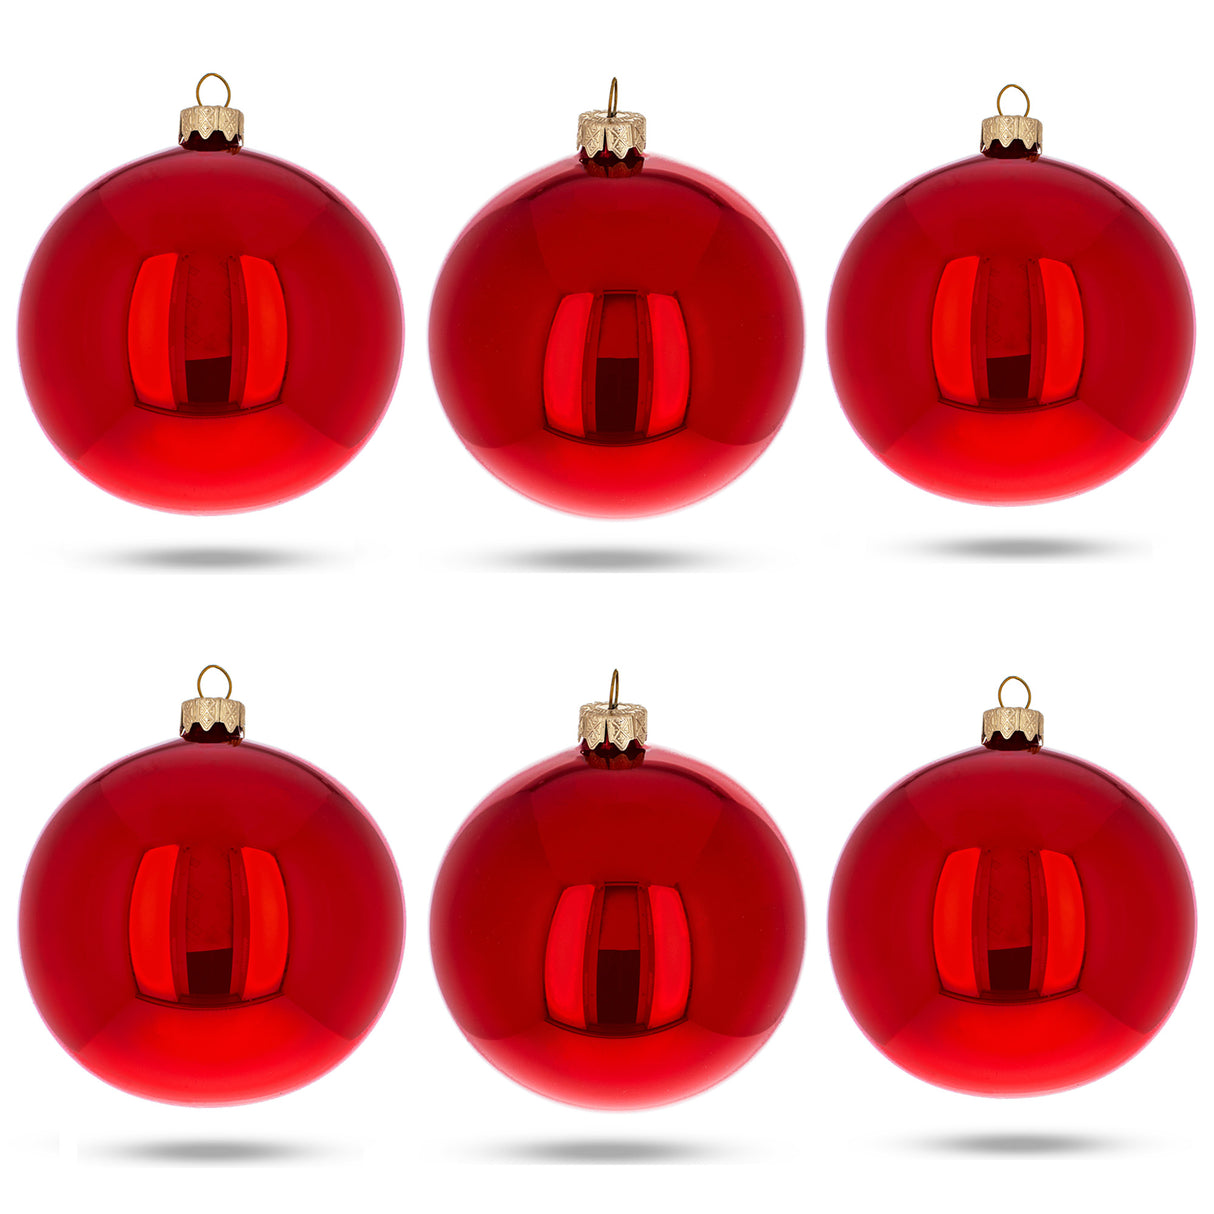 Glass Set of 6 Red Glossy Glass Ball Christmas Ornaments 3.25 Inches in Red color Round